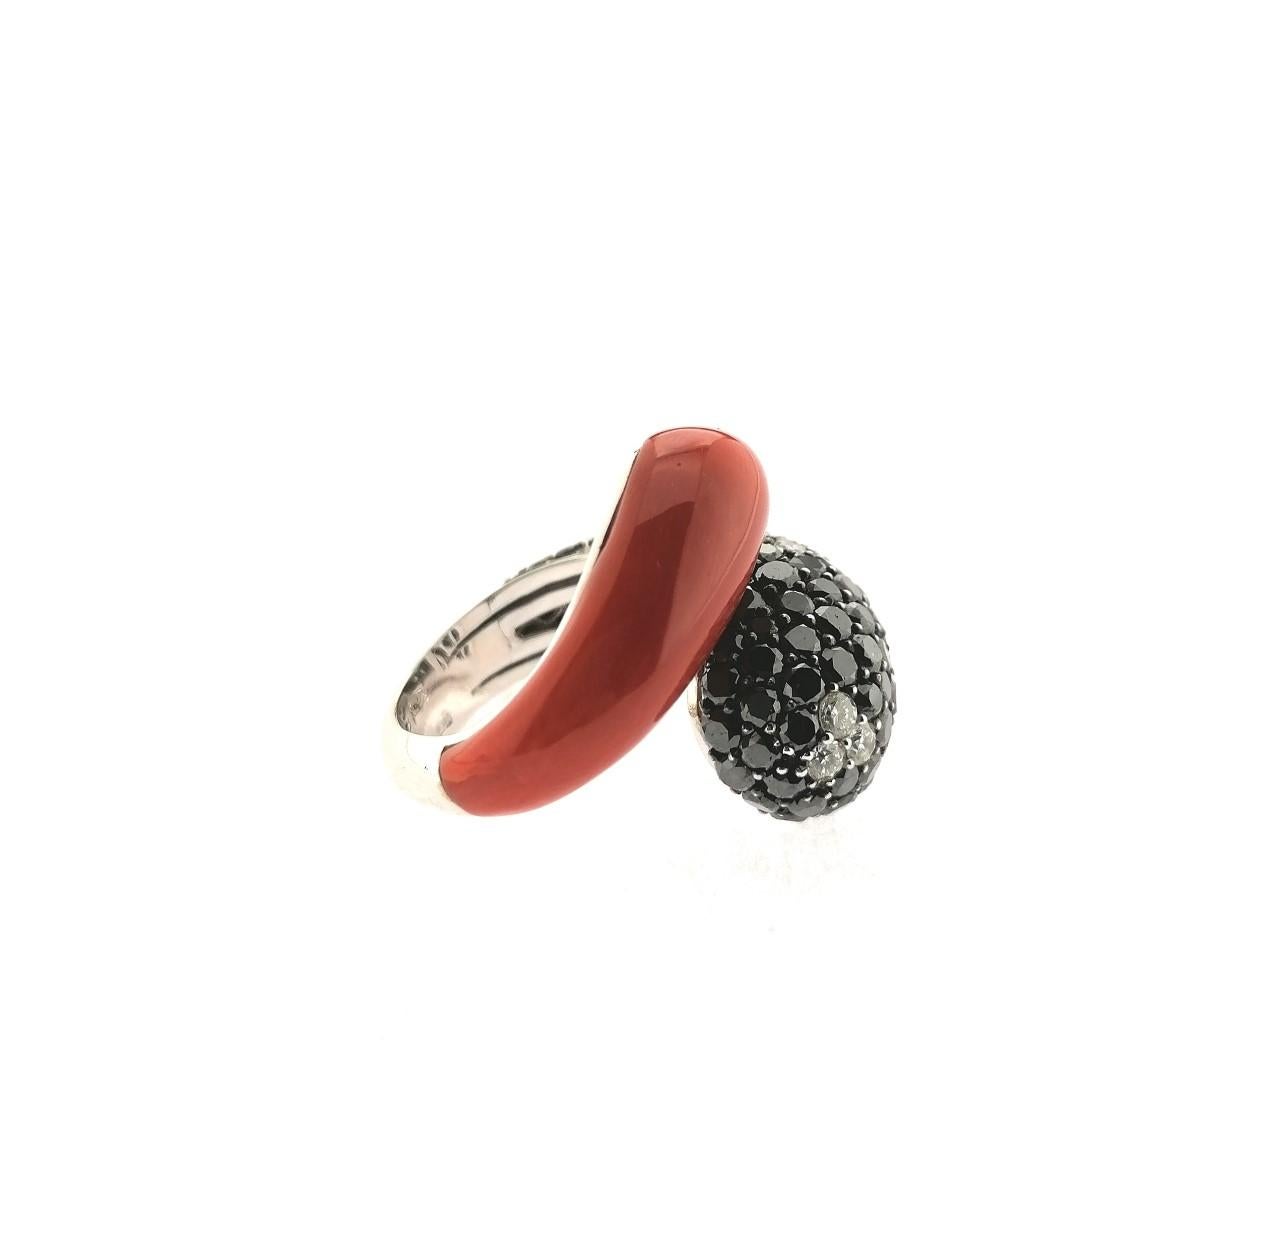 18 karat white gold ring with black diamonds (7.00 carats), white diamonds (0.84 carats) and natural coral. It is at number 8 (USA). It has an internal adapter to fit the finger. Current and fresh Italian design.